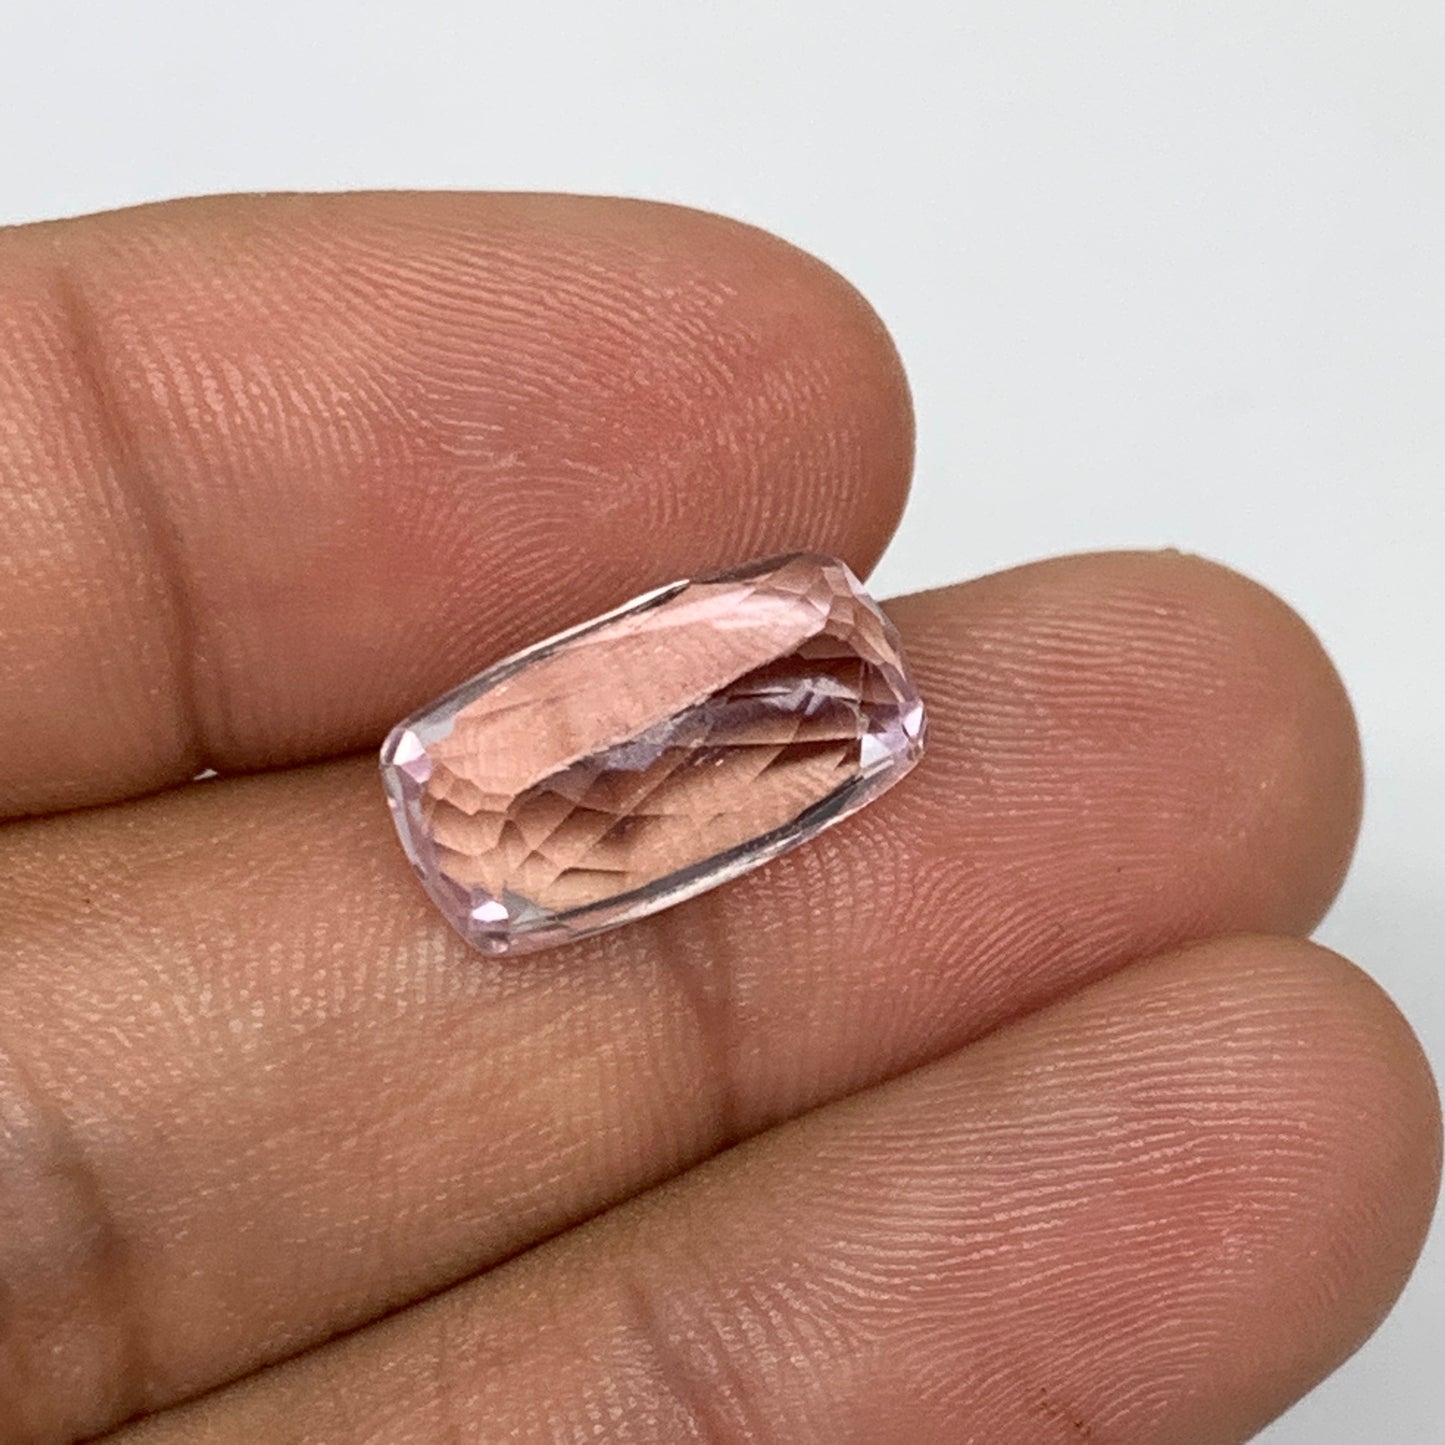 7.80cts, 15mmx8mmx6mm,Heated Kunzite Crystal Facetted Stone @Afghanistan,CTS231